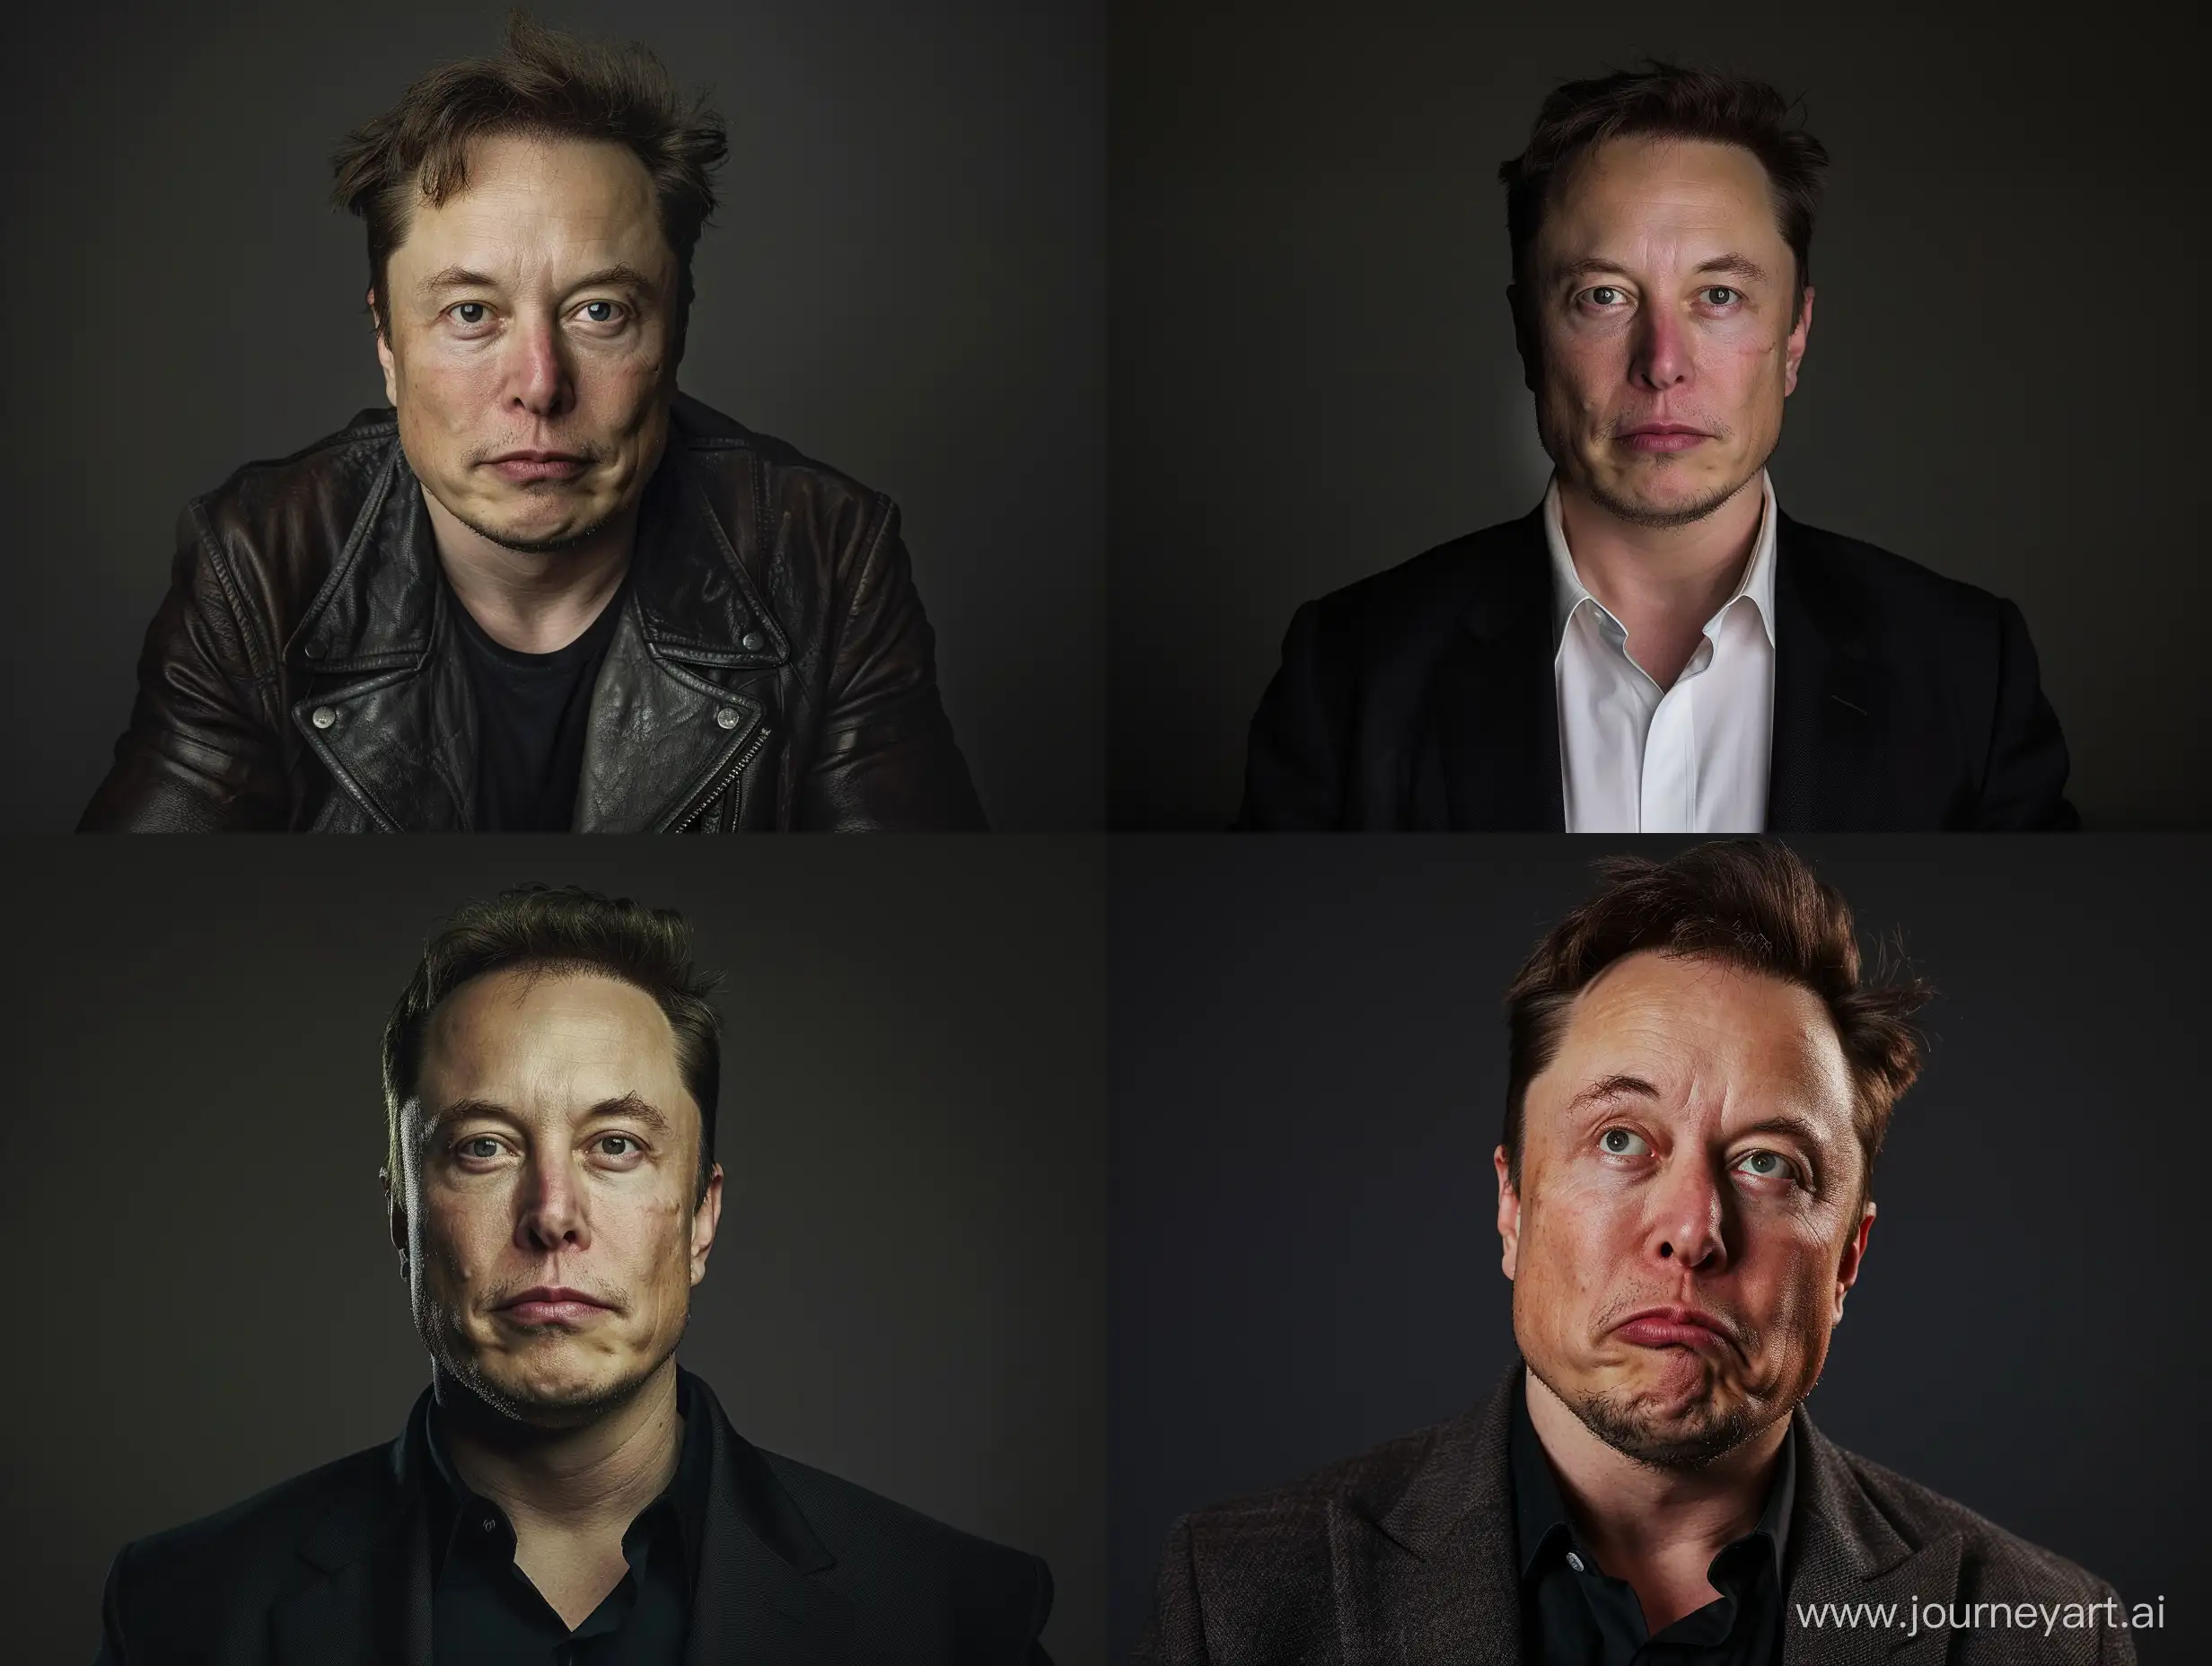 A cinematic very close-up photo of Elon Musk on a flat black background with good lighting